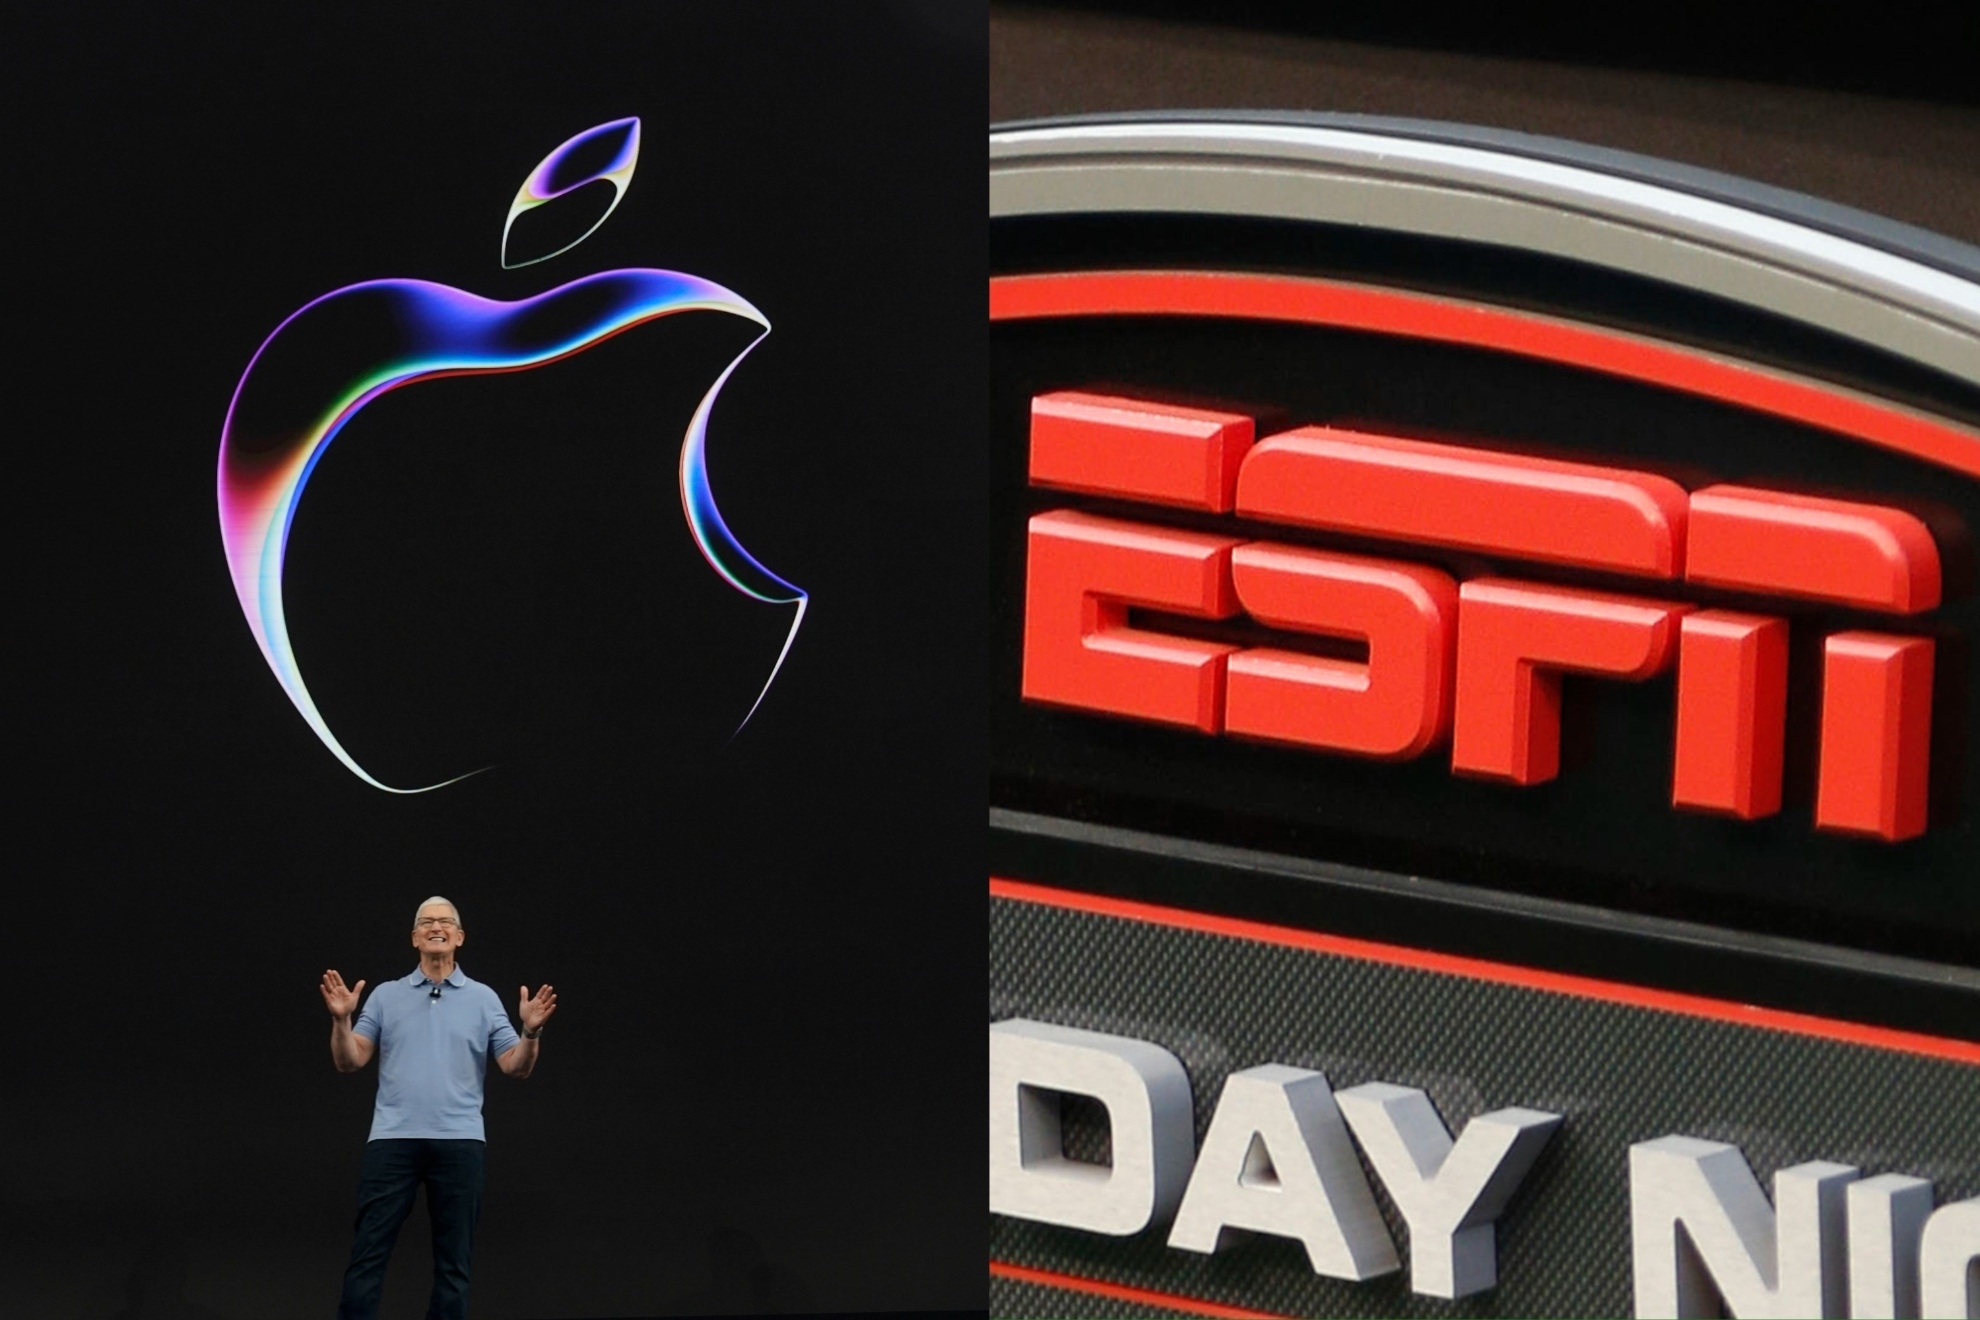 NBA streaming rights: Apple expressed interest in, but can't bid yet